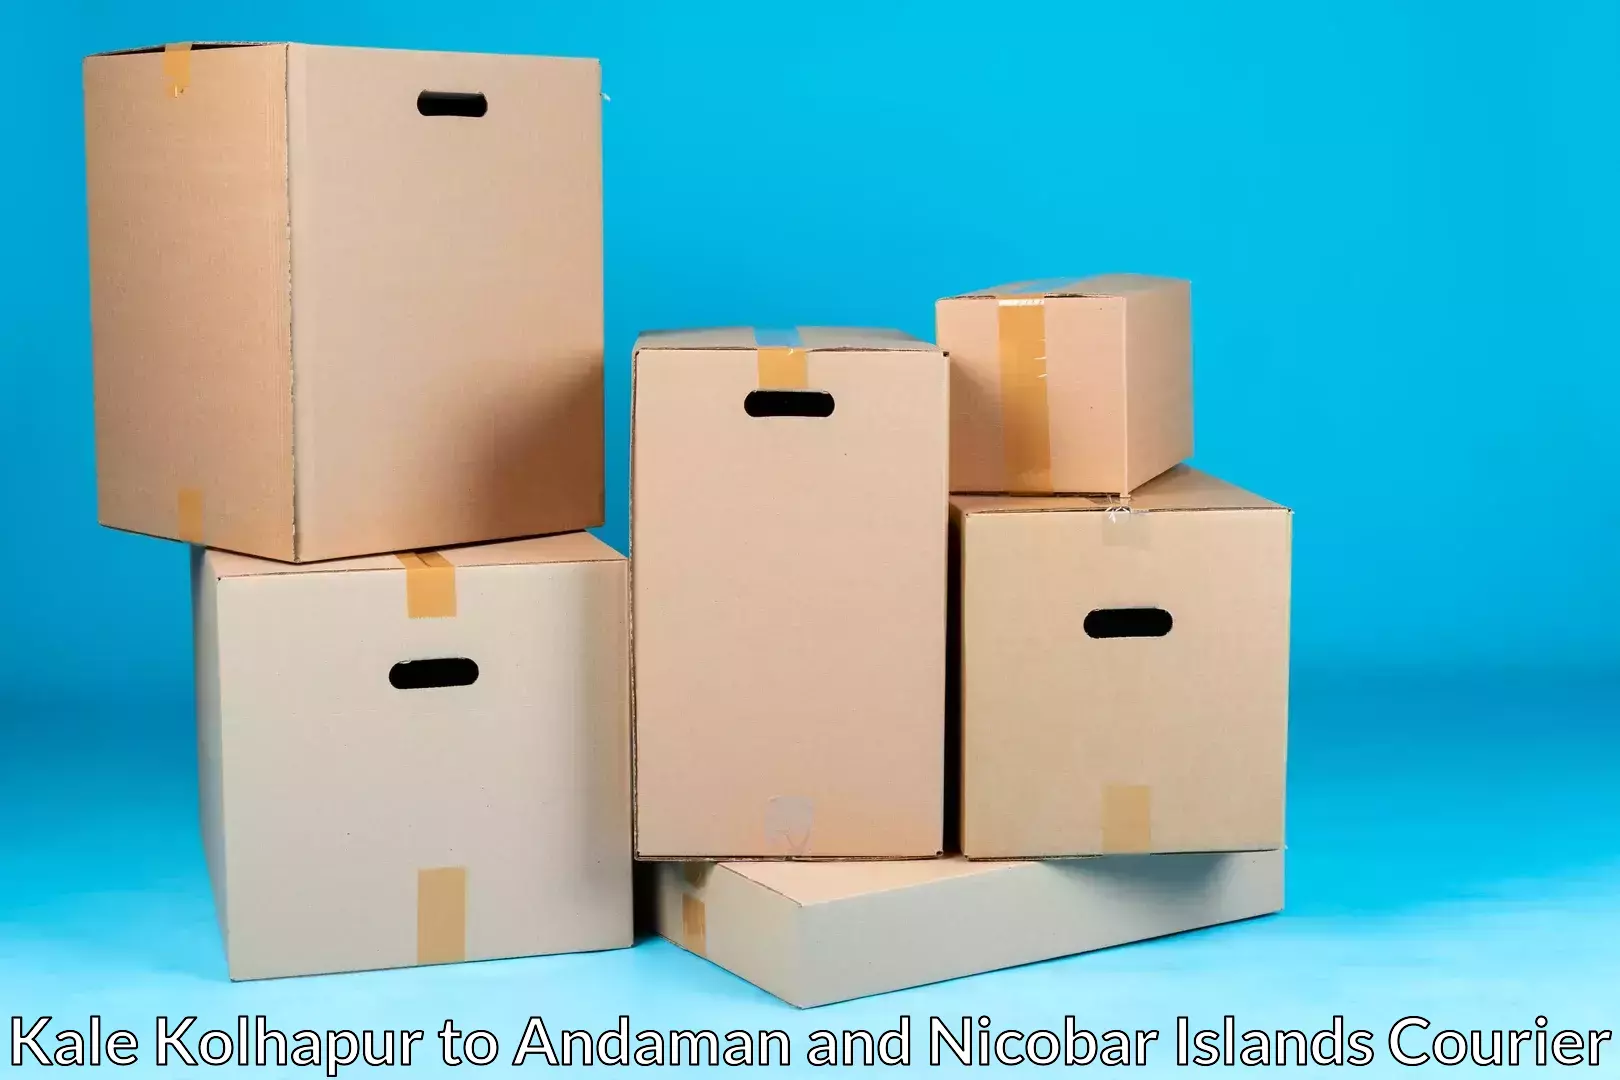 Professional movers in Kale Kolhapur to North And Middle Andaman